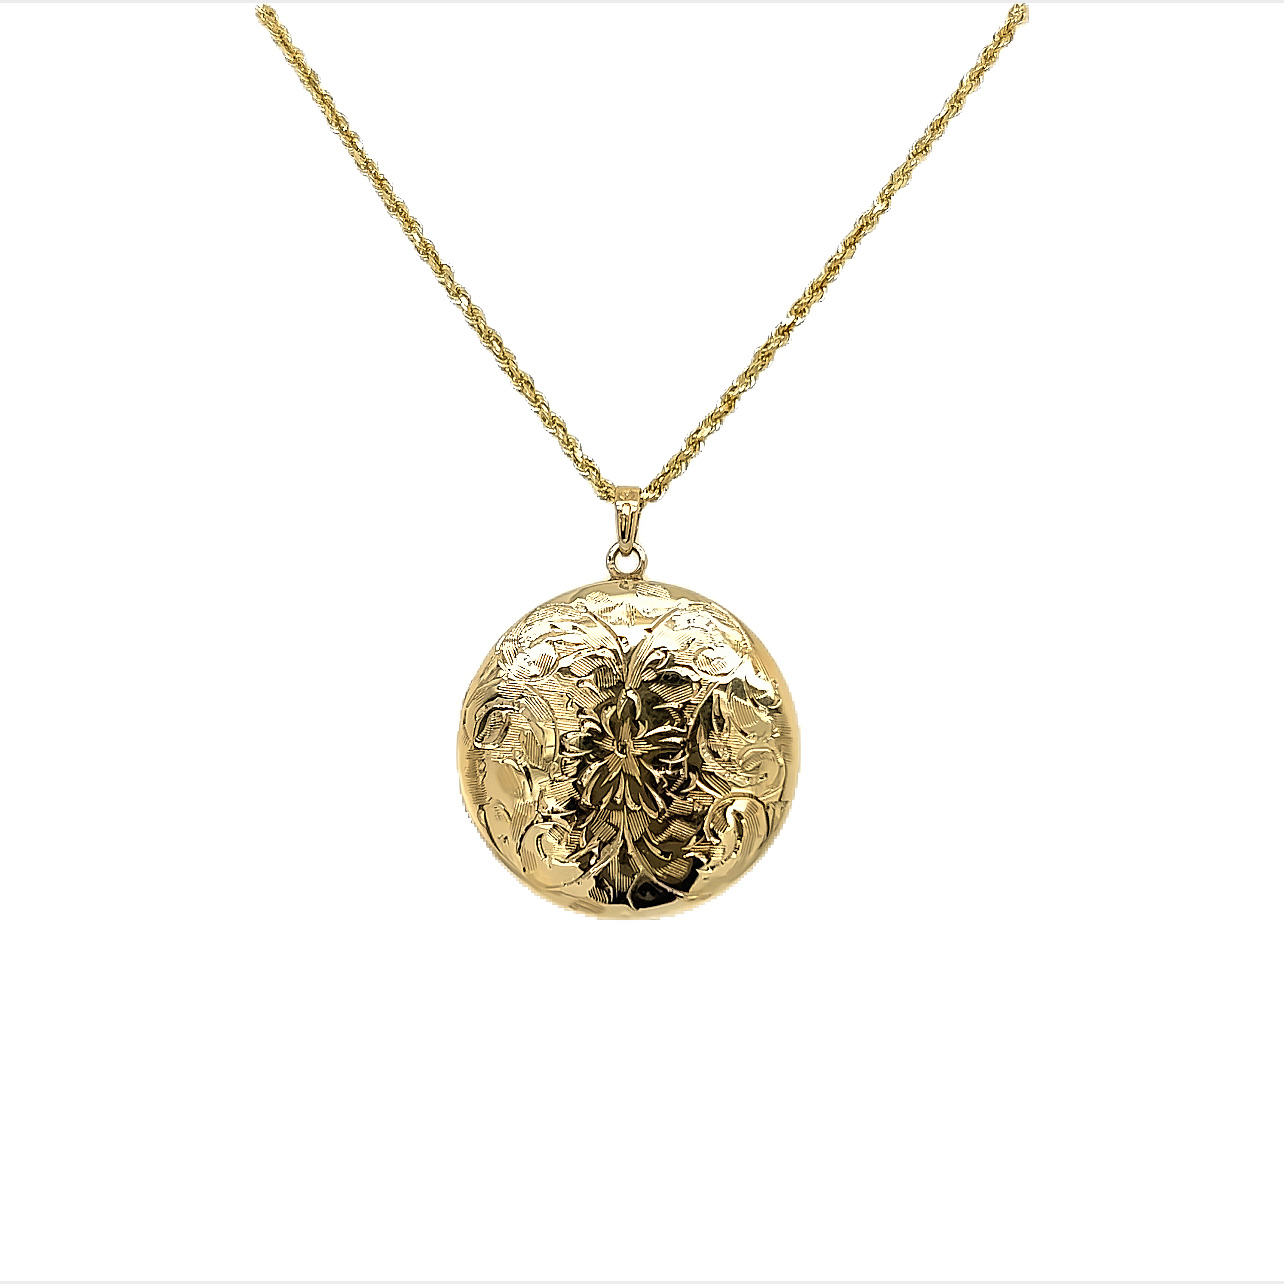 Round engraved locket with 18" rope chain.